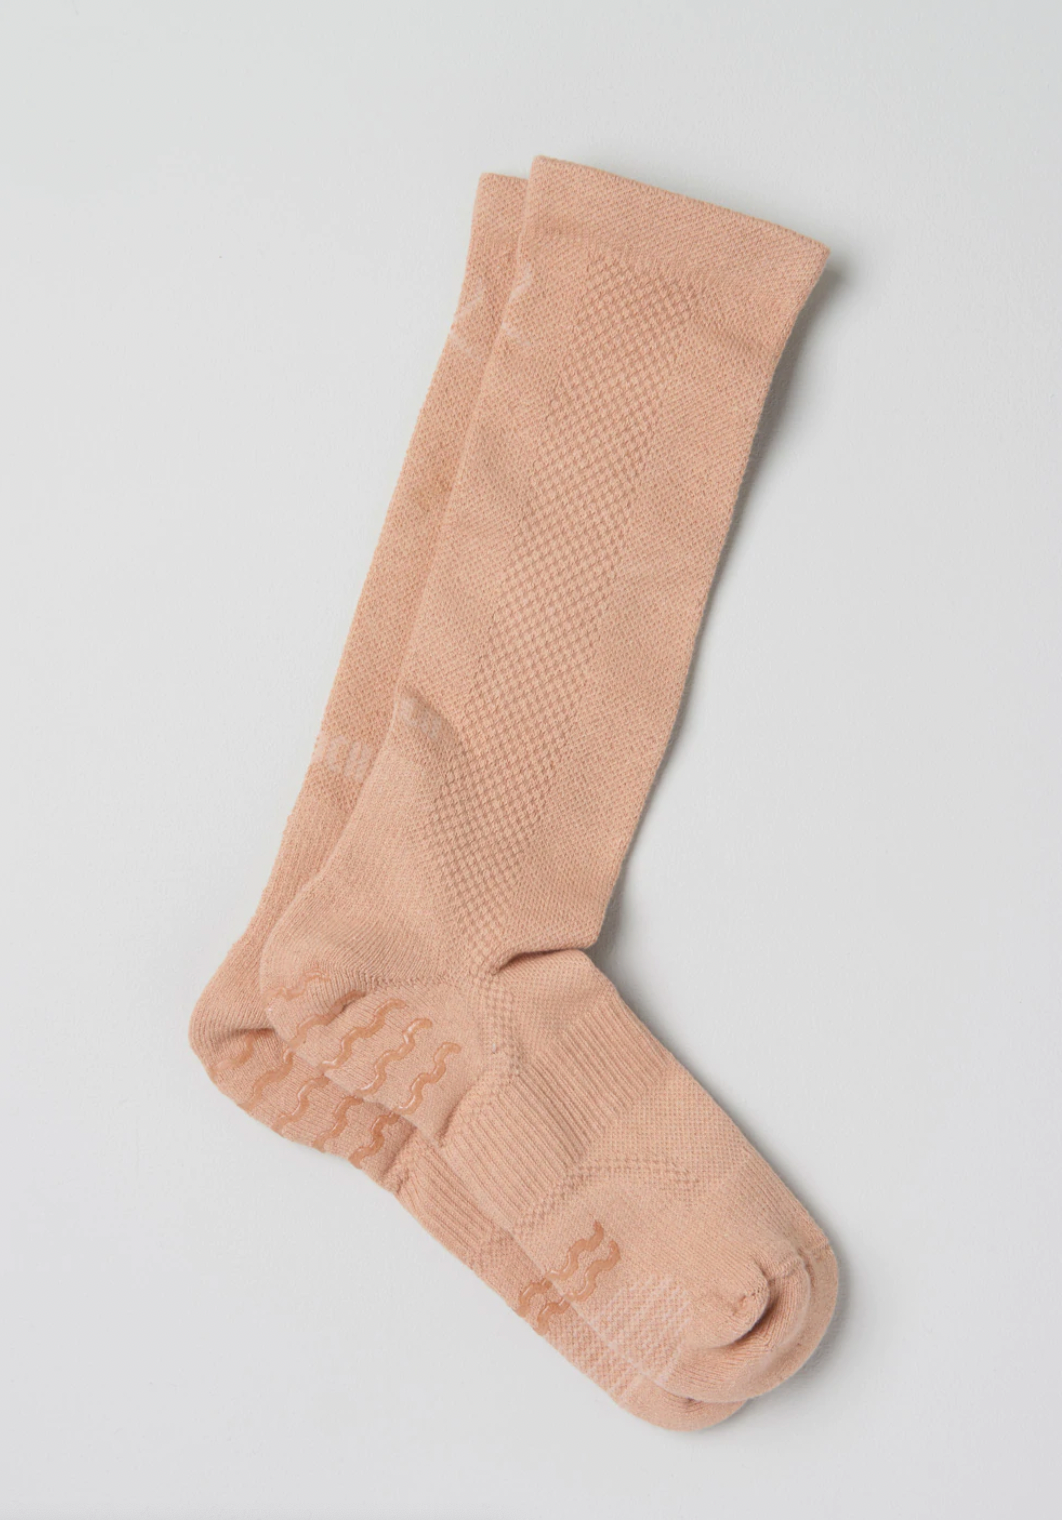 Blochsox dance socks in sand from the collective dancewear